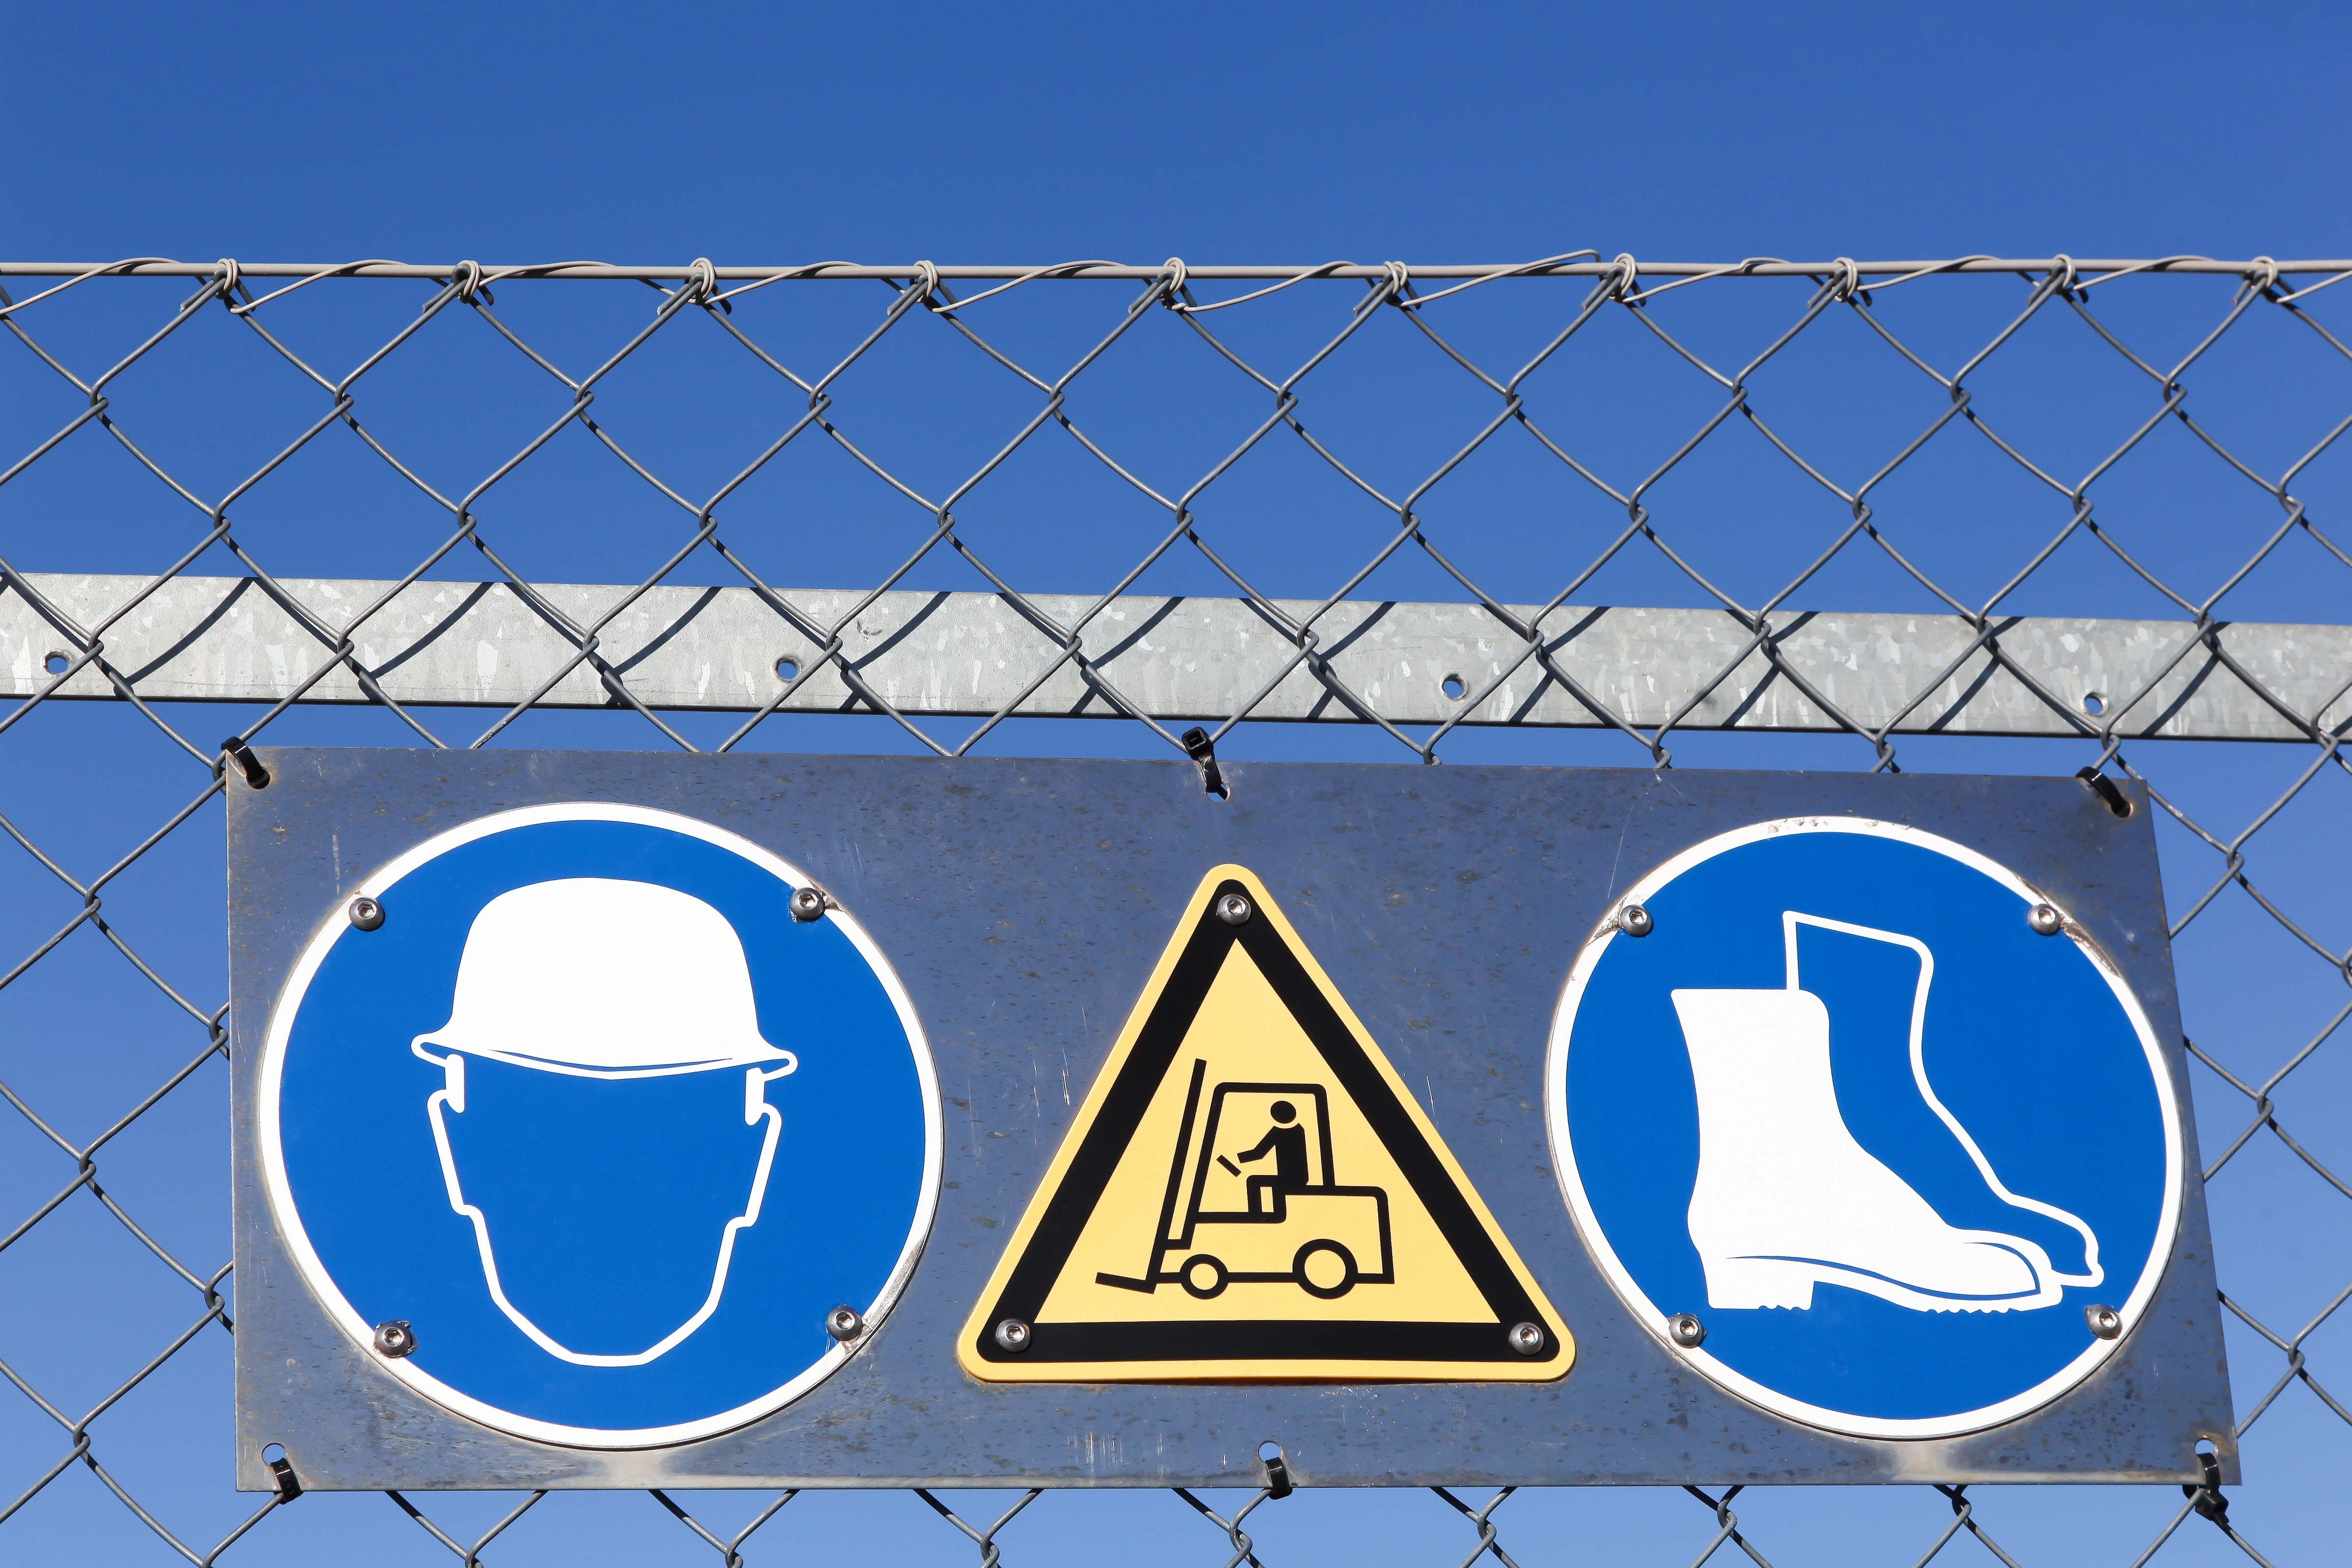 Construction safety signs